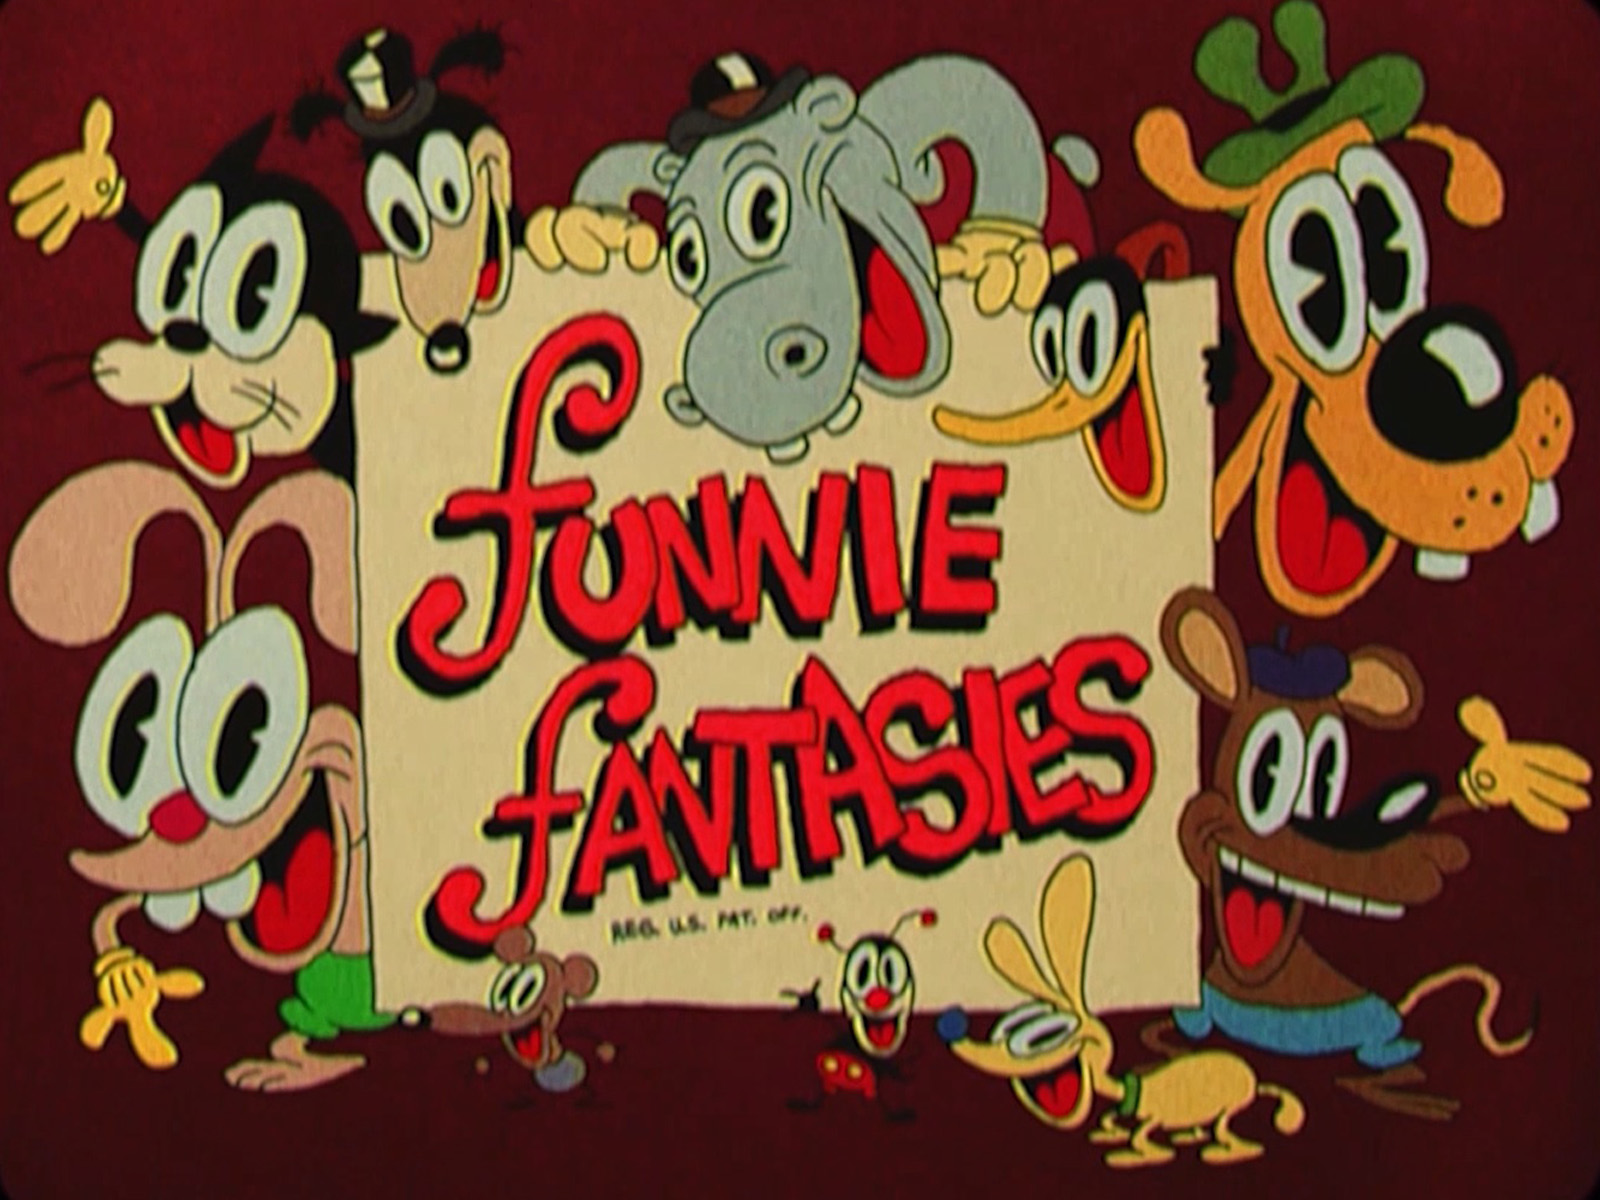 An intro title screen with the words &quot;funnie fantasies&quot; surrounded by various animal characters